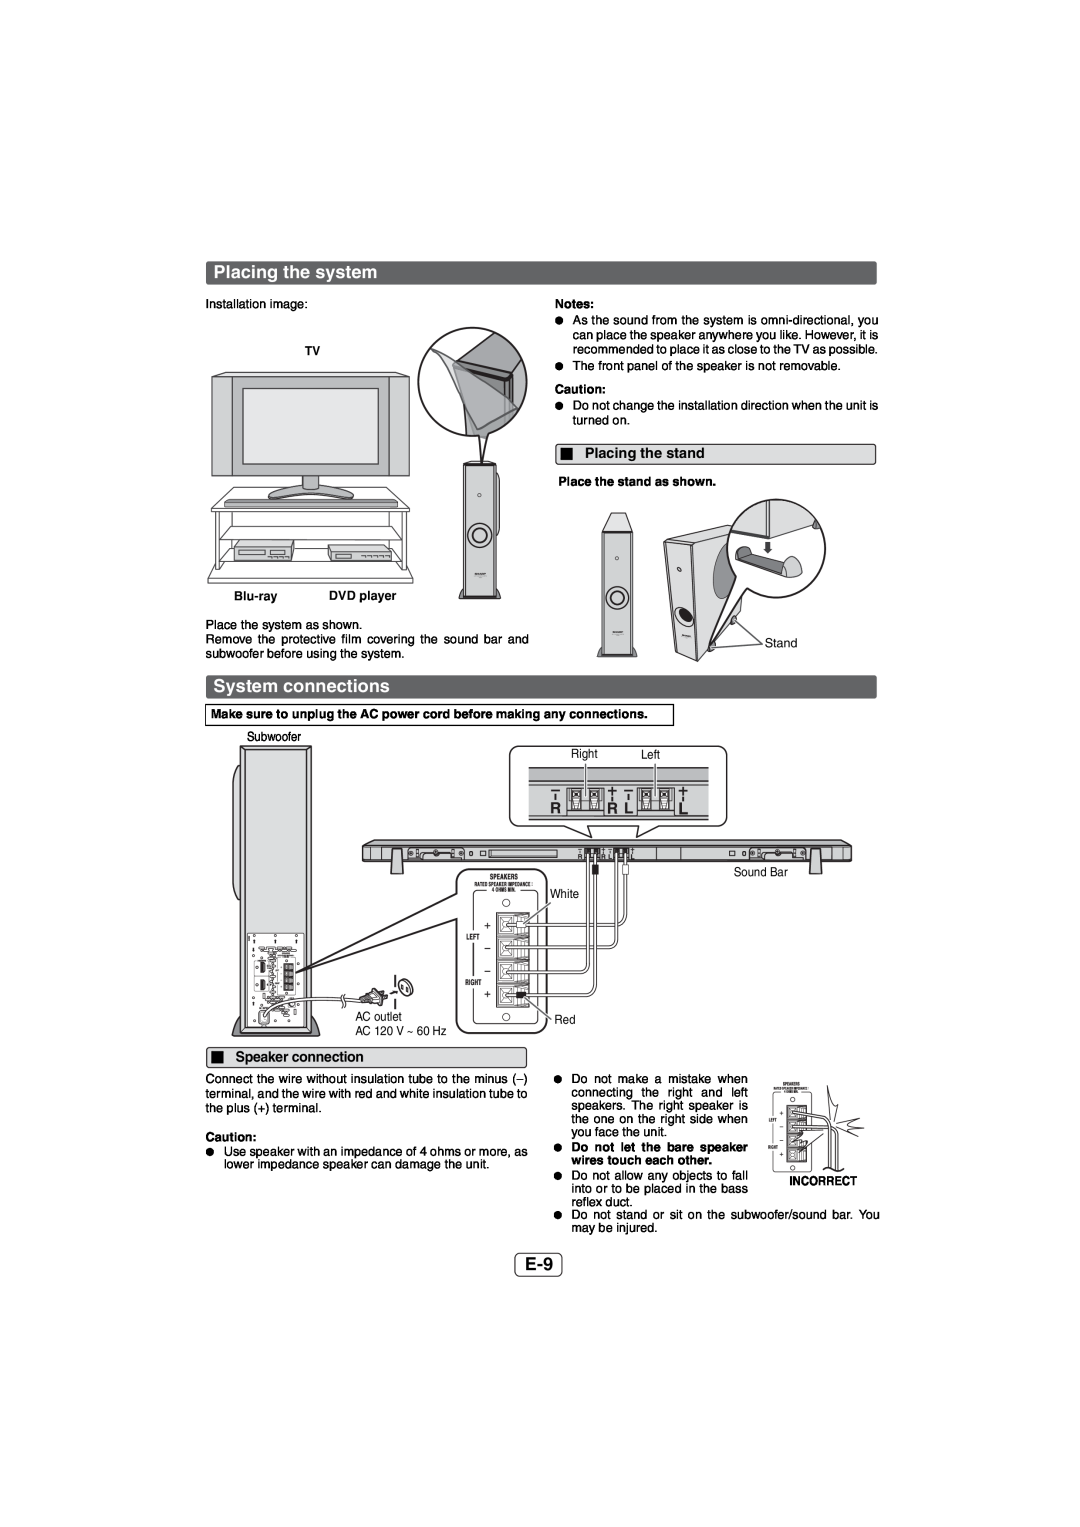 Sharp HT-SL50 operation manual Placing the system, System connections, Placing the stand, Speaker connection, Blu-ray 